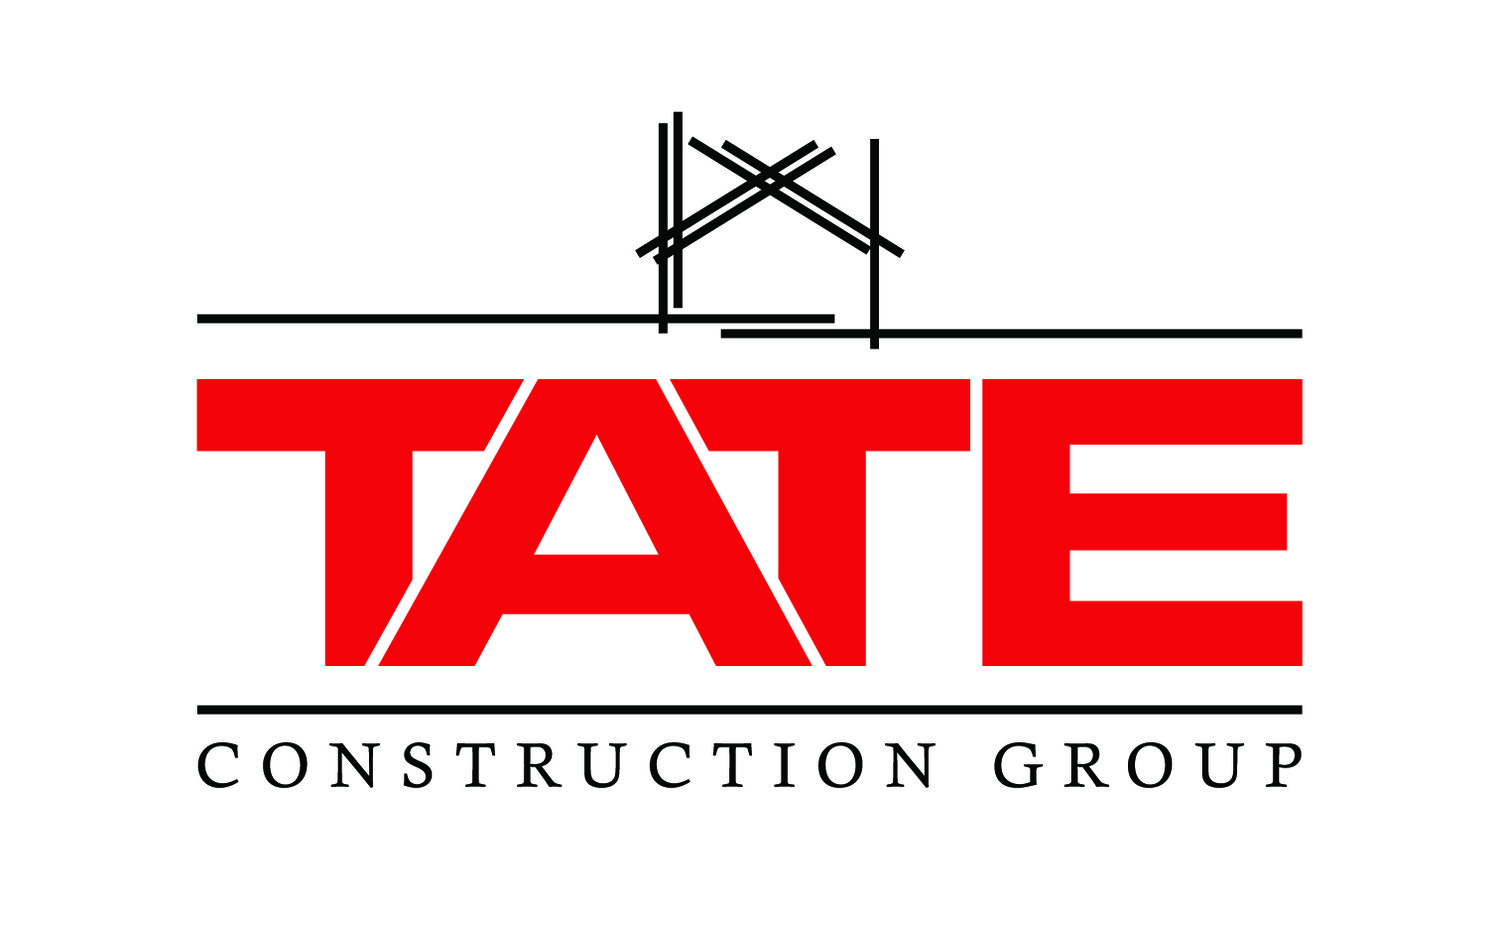 Tate Construction Group